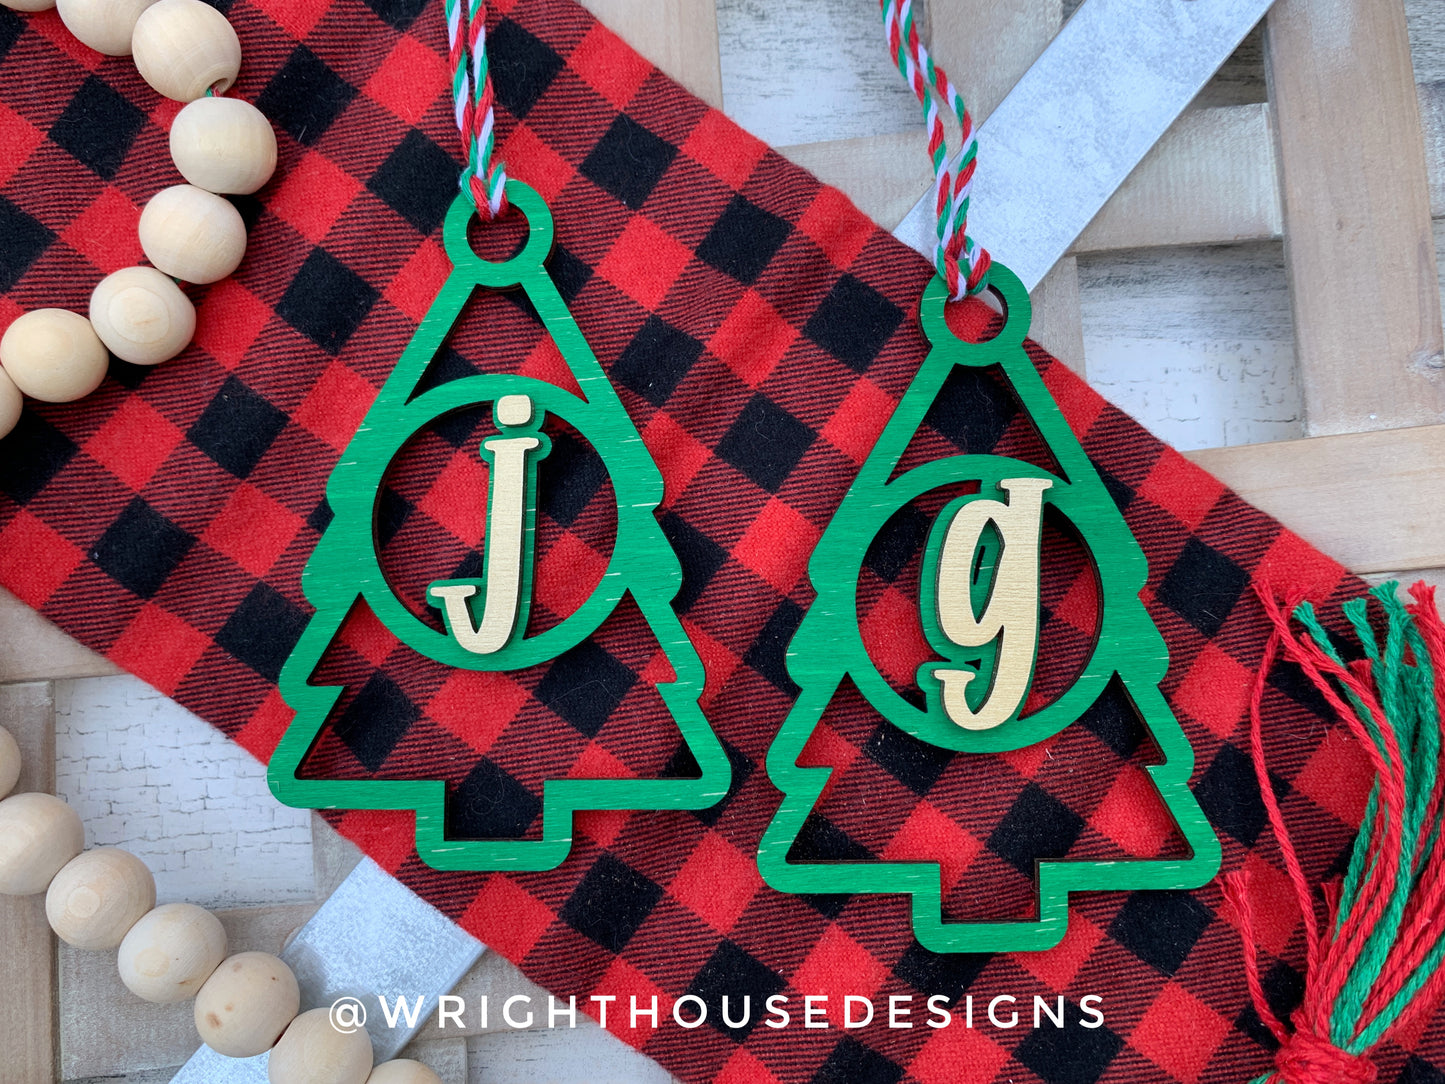 Personalized Pine Tree - Monogram Name Initial - Wooden Christmas Tree Ornament - Gift Bag Tag - Handmade - Winter Decor - Holiday Gift